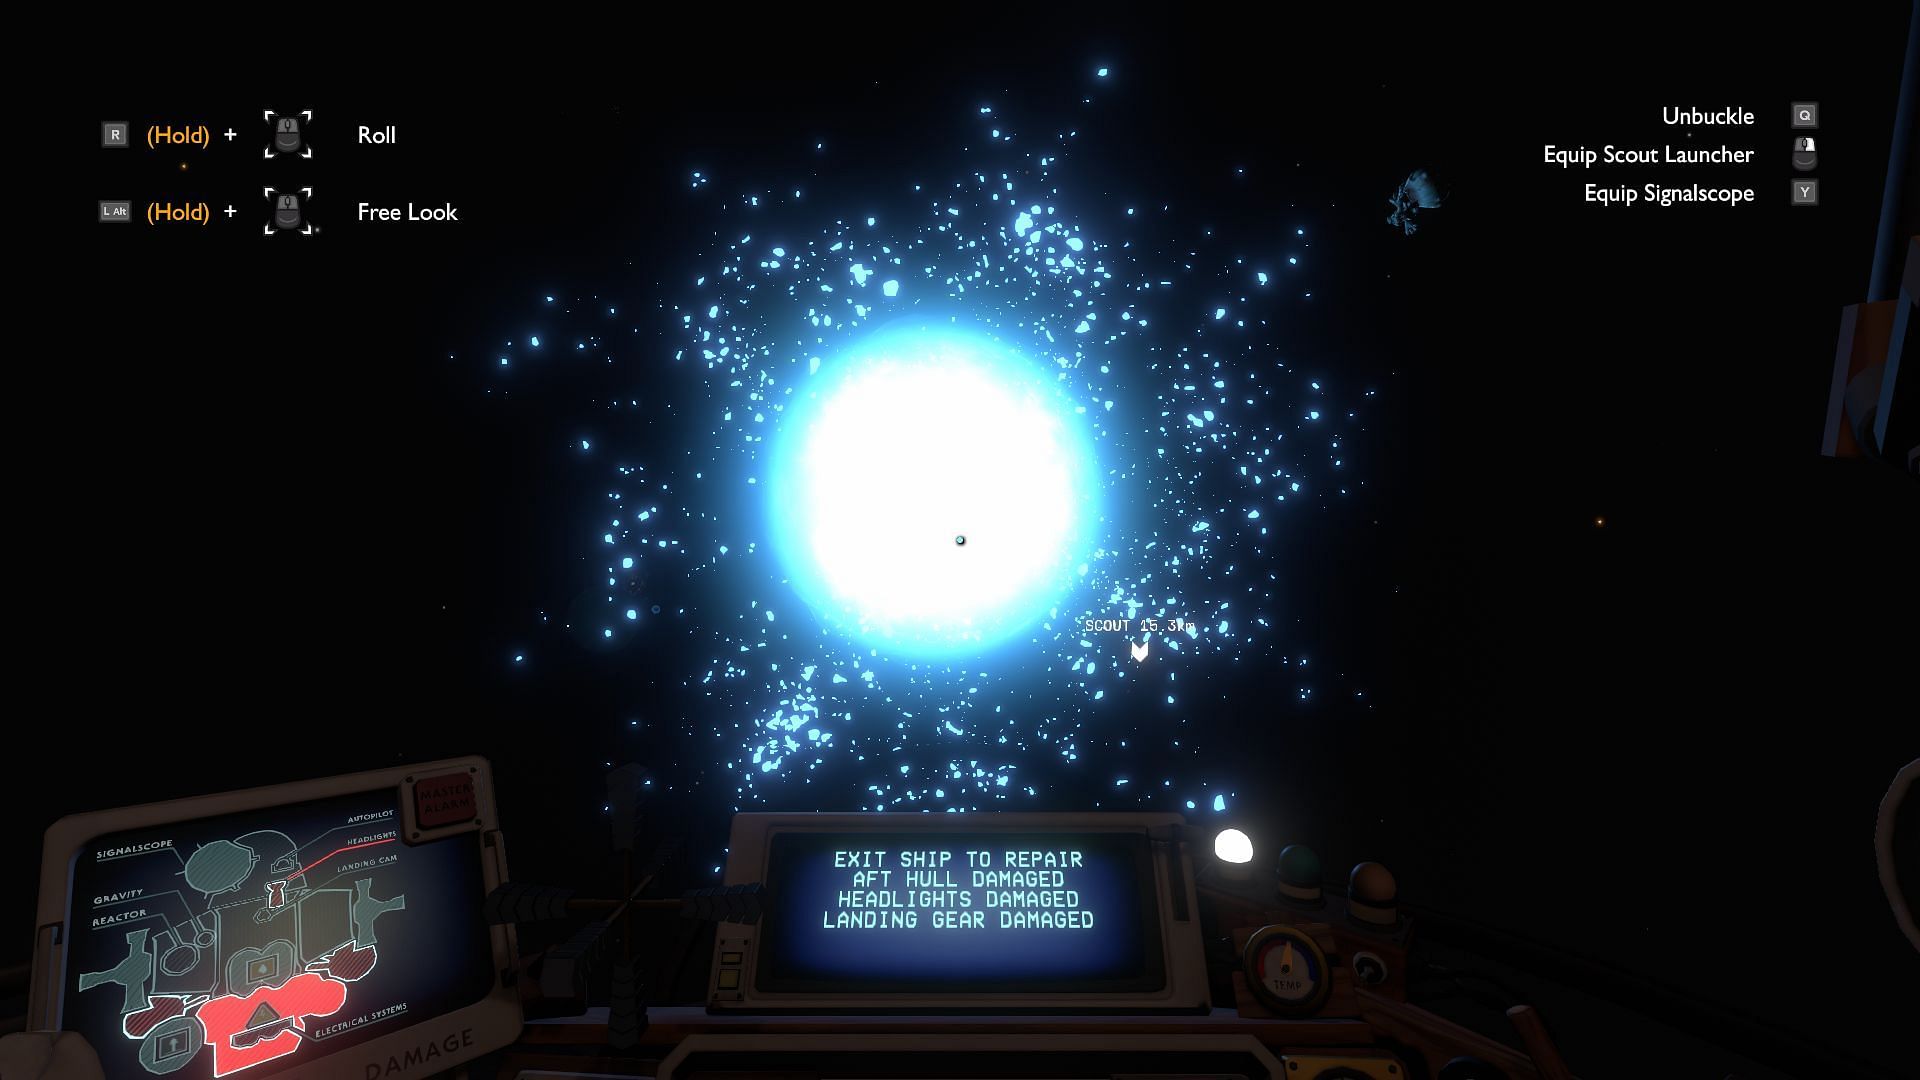 Surprise 'Outer Wilds' expansion will explore the deepest secrets of space